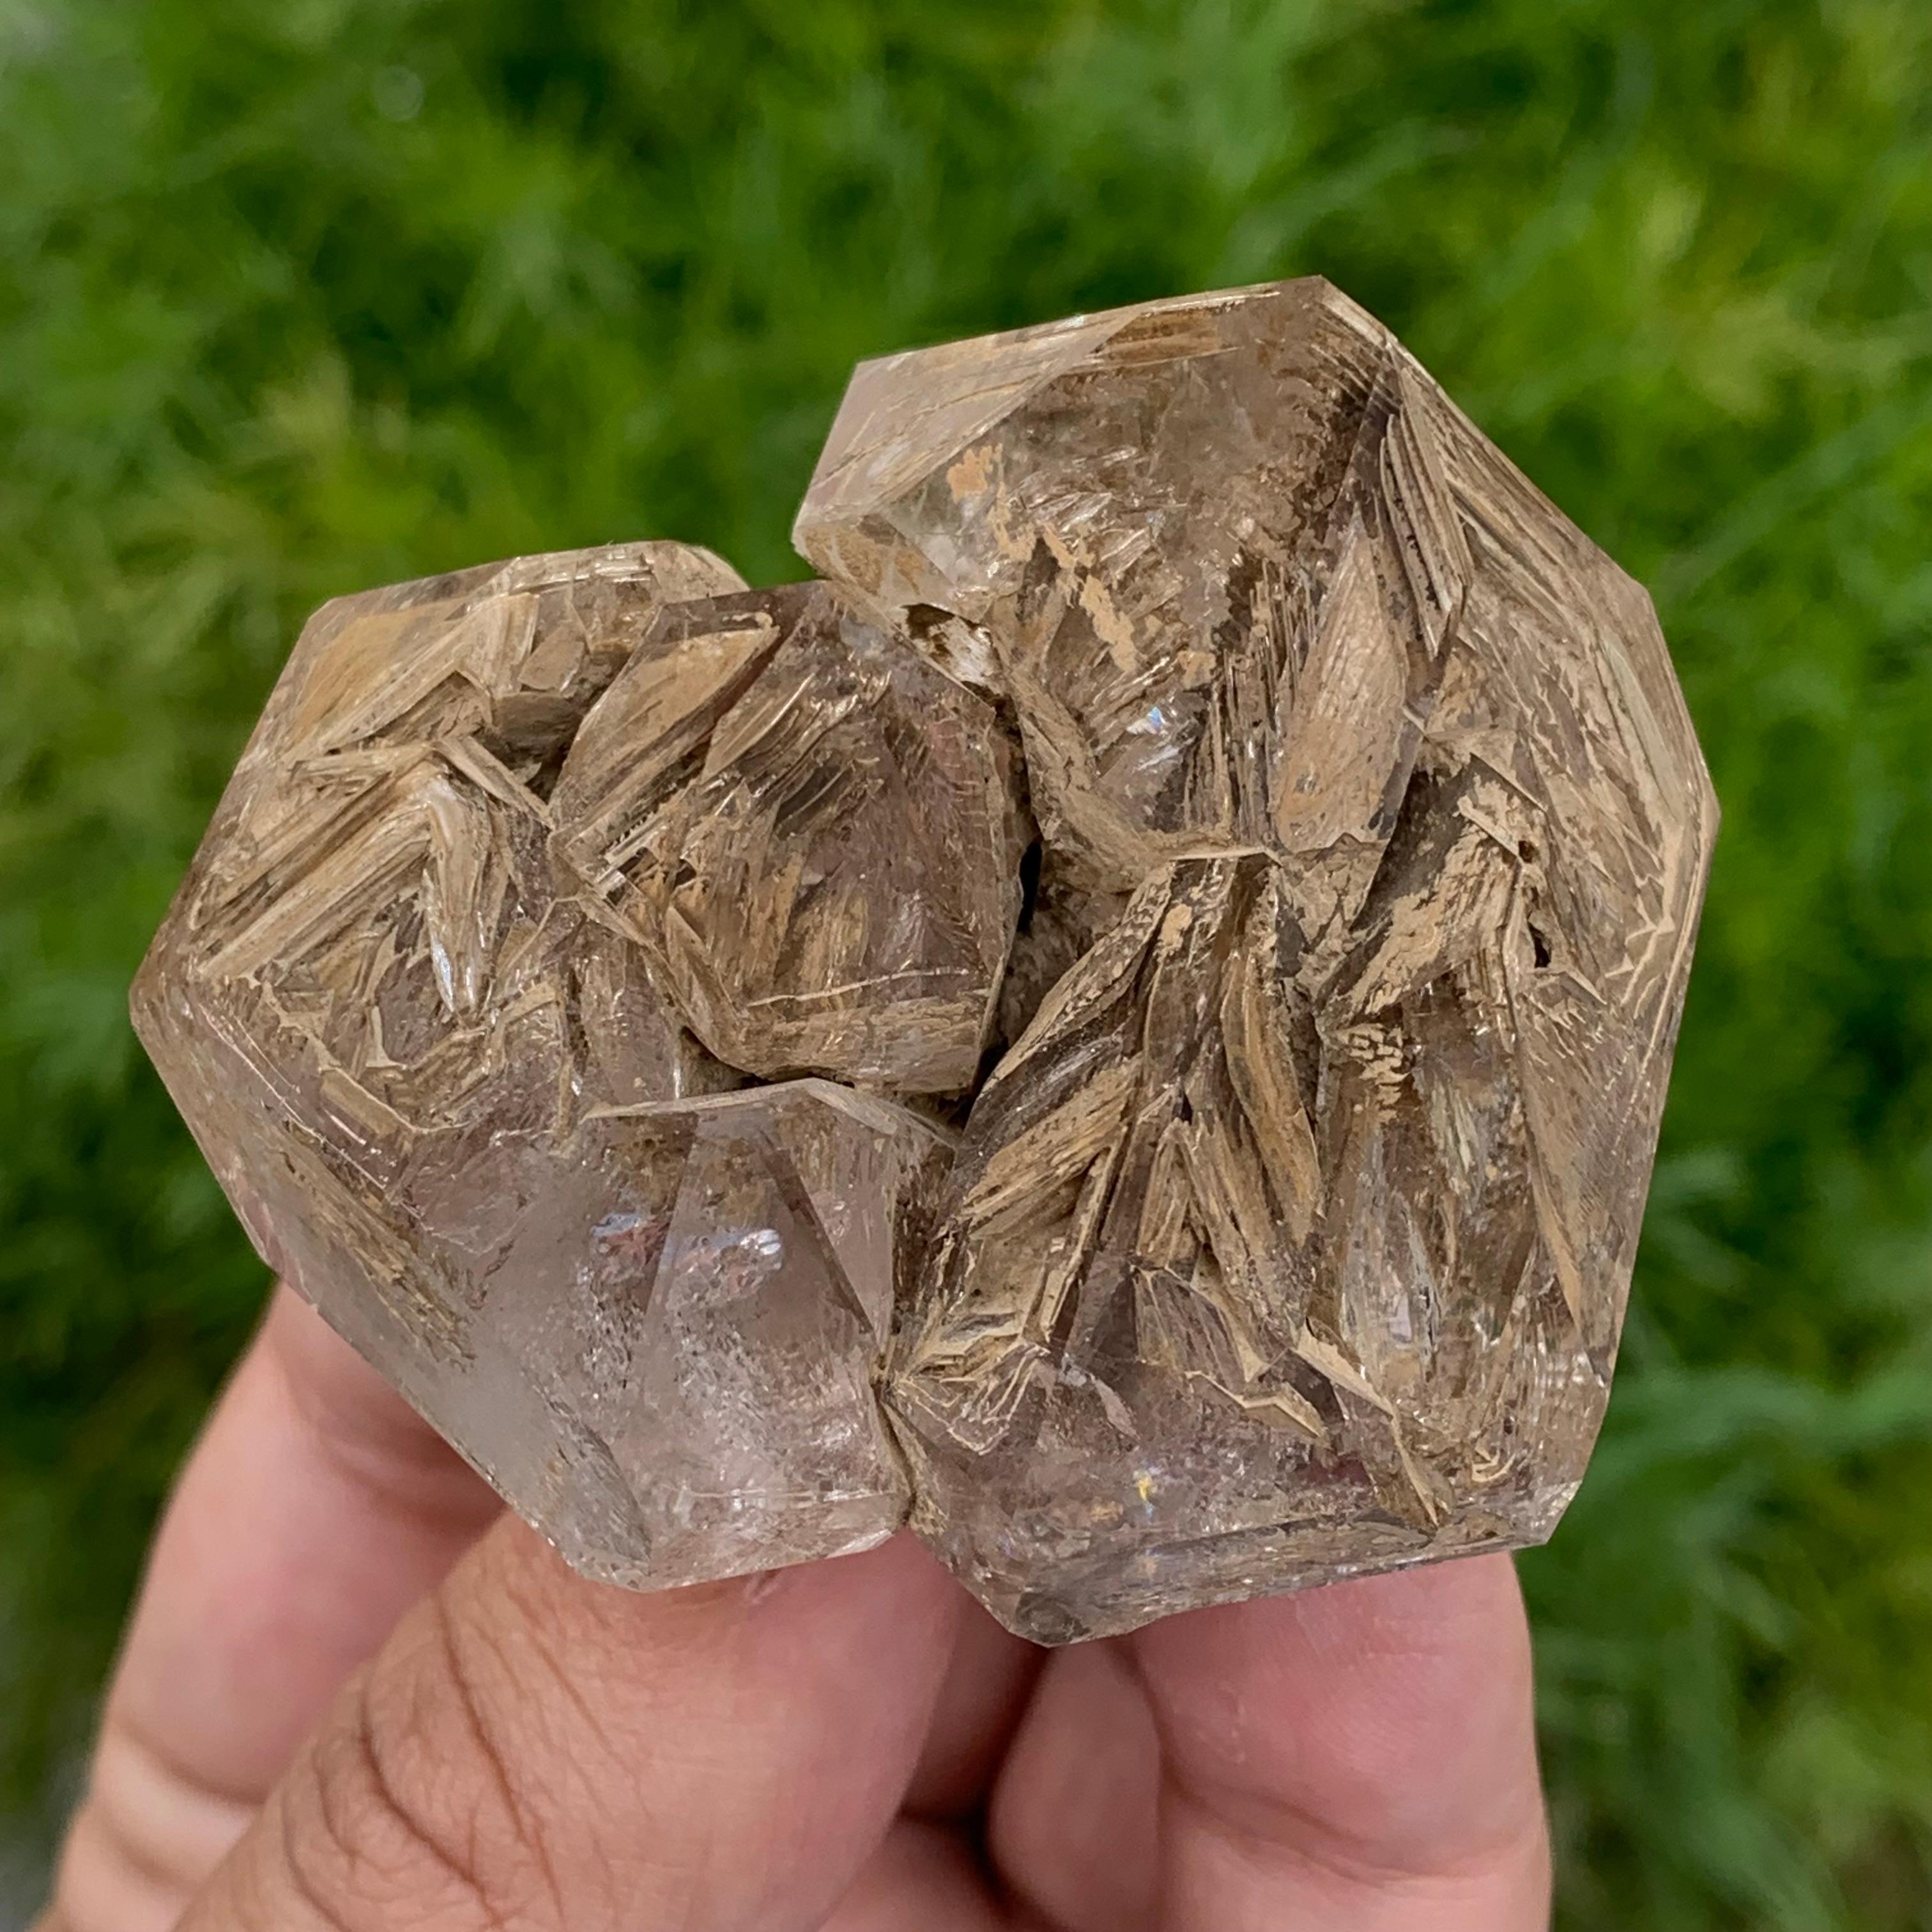 Natural 90.37 Gram Muddy Skeletal quartz from Balochistan, Pakistan
Weight: 90.37 Gram
Dimension: 4.2 x 5.9 x 4.9 Cm
Origin: Balochistan, Pakistan 
Quality: AAA
Today quartz is used in many products as a raw material for huge amounts of